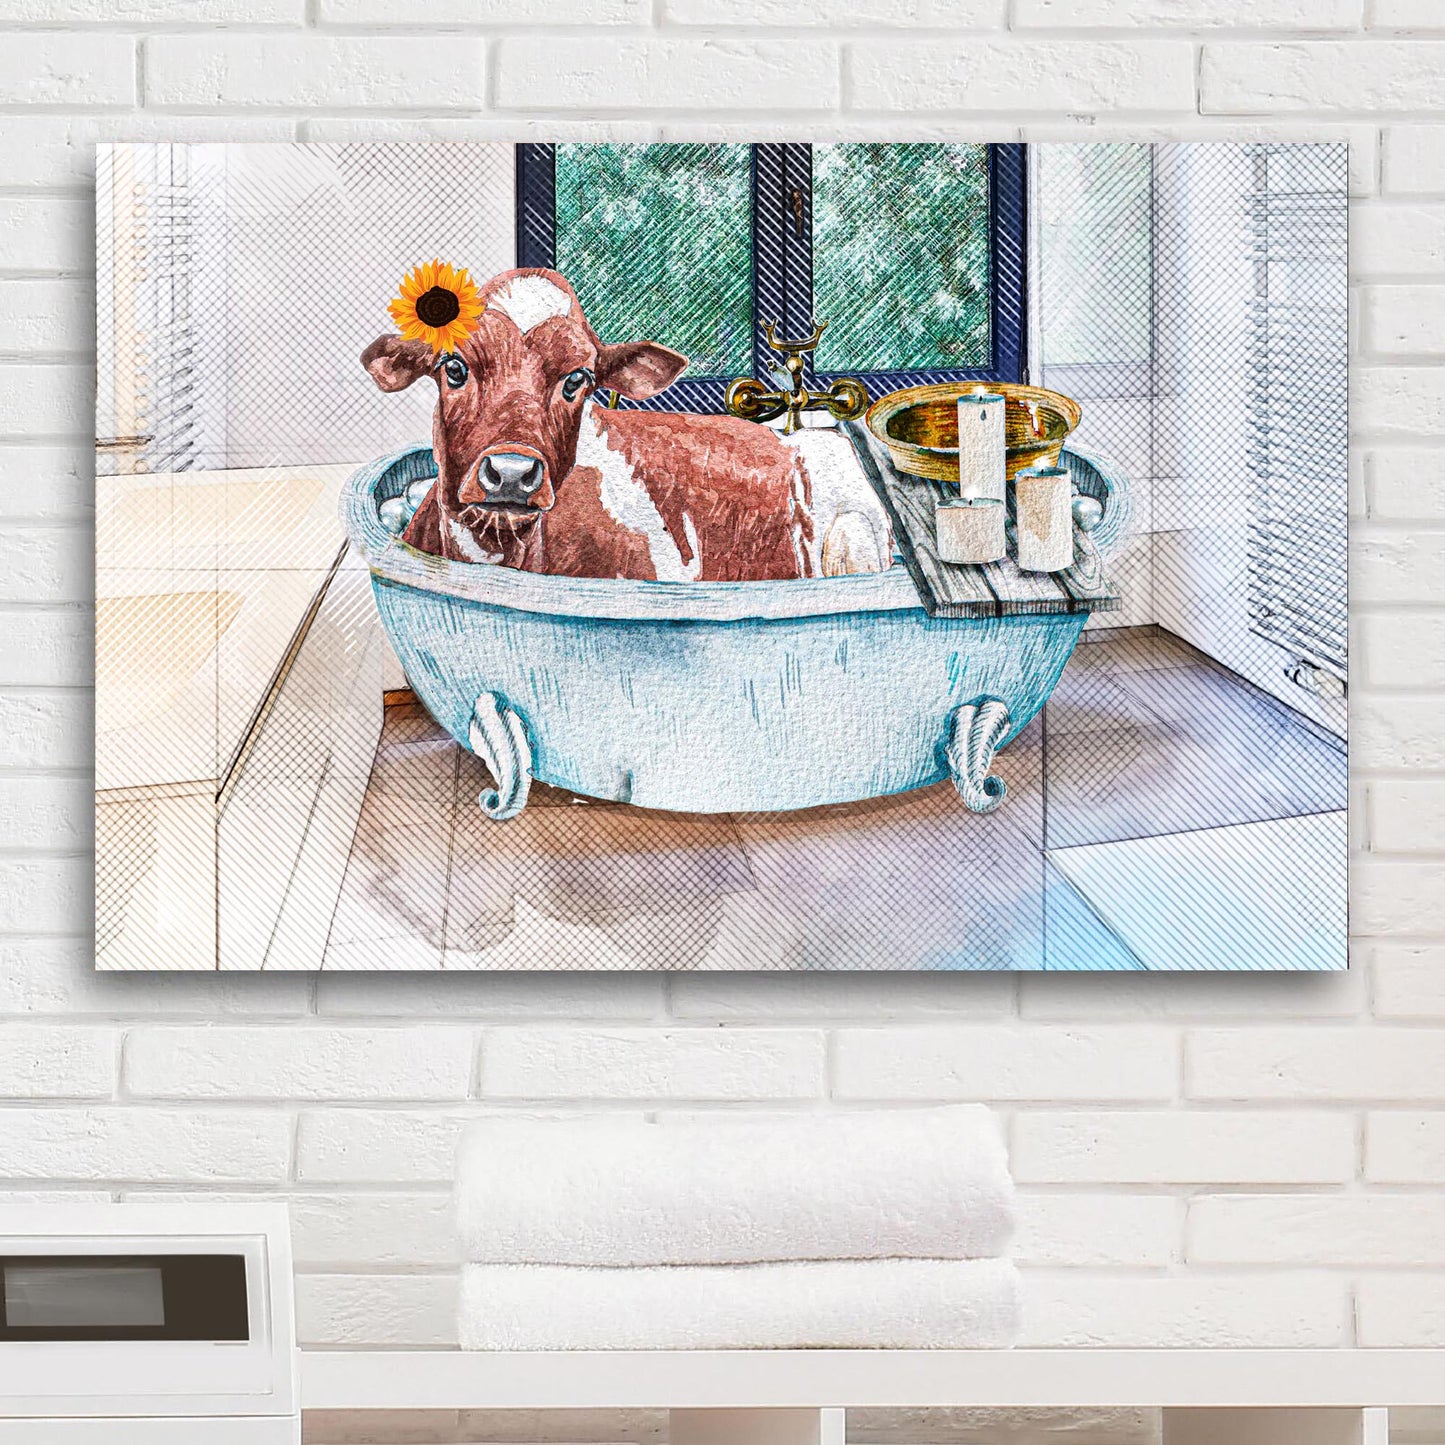 Cow Cattle In Bathtub Canvas Wall Art - Image by Tailored Canvases